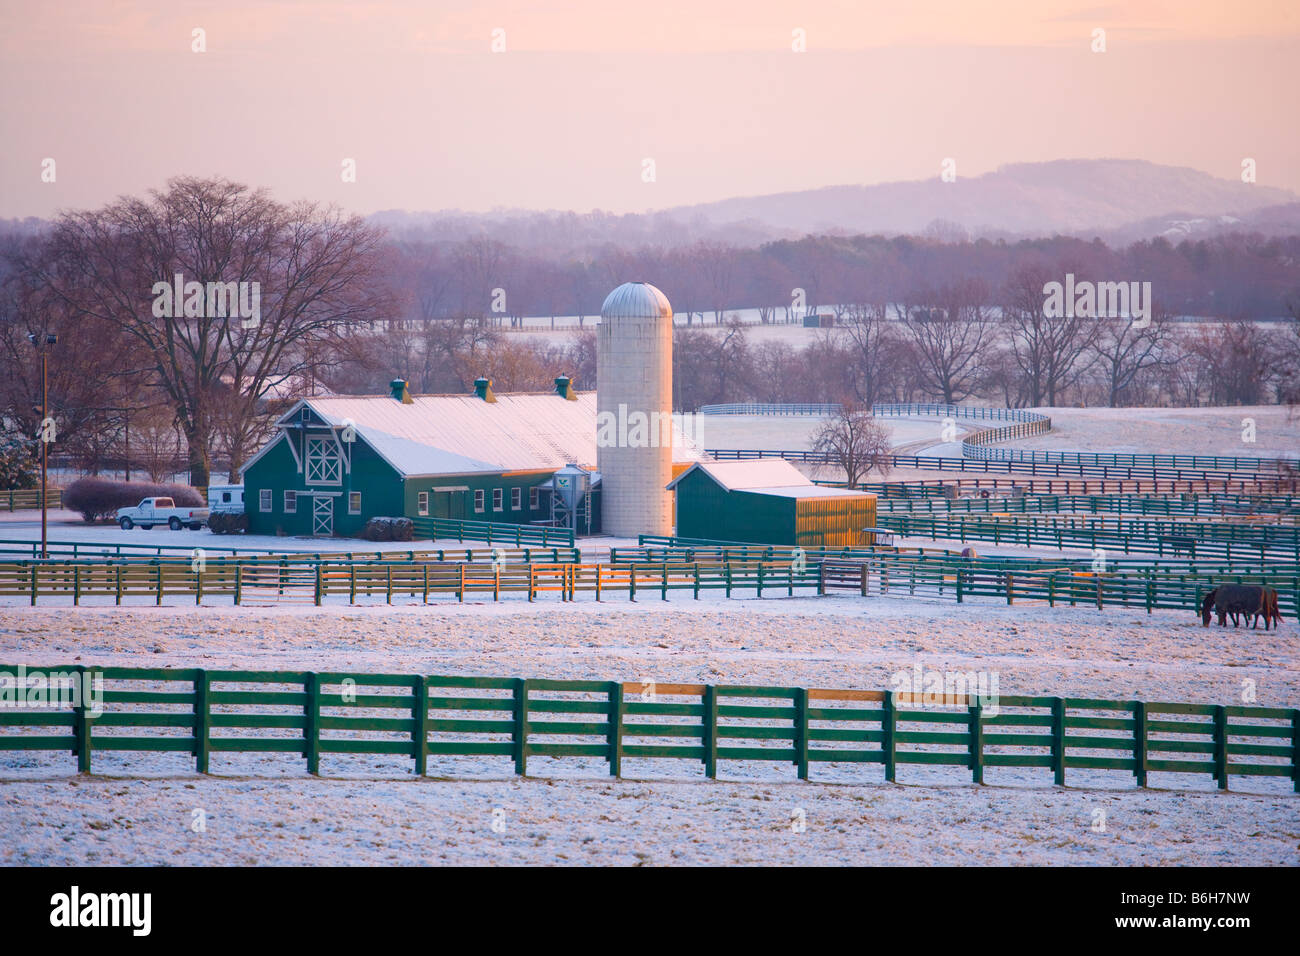 Sunrise on a barn and grain silo after a fresh snowfall, Brentwood, Tennessee Stock Photo